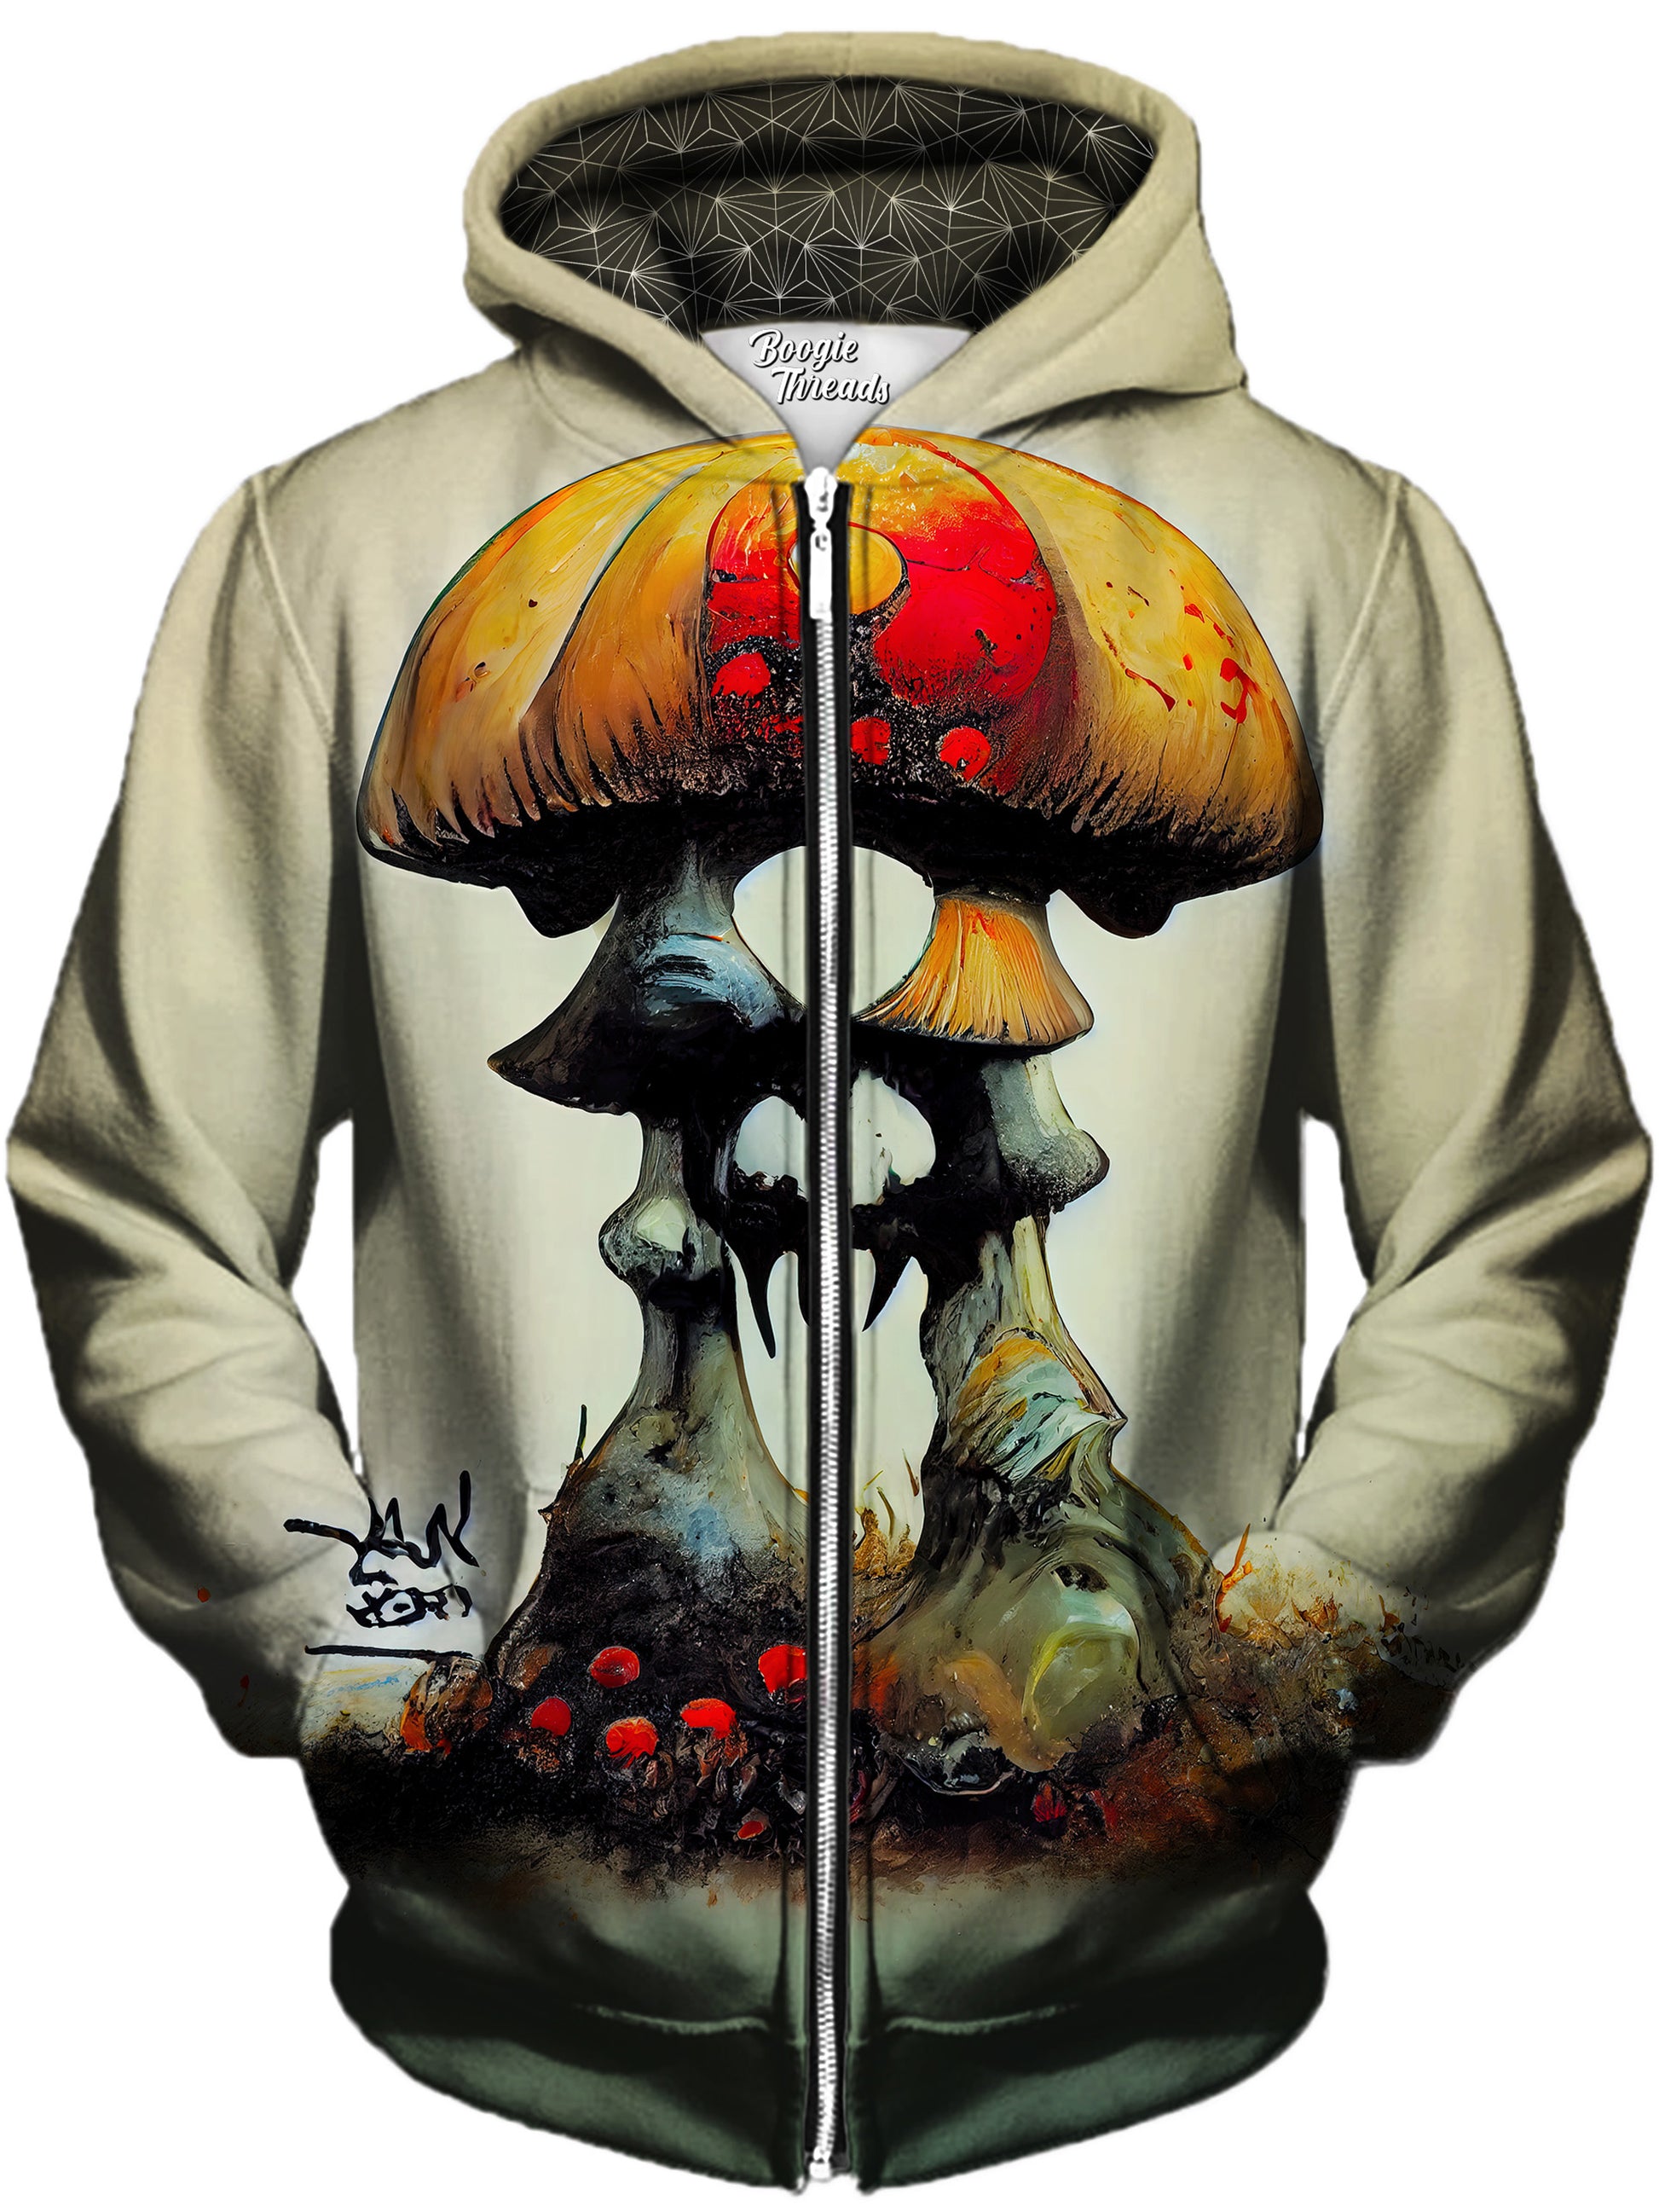 Muddled Redemption Unisex Zip-Up Hoodie, Gratefully Dyed, | iEDM